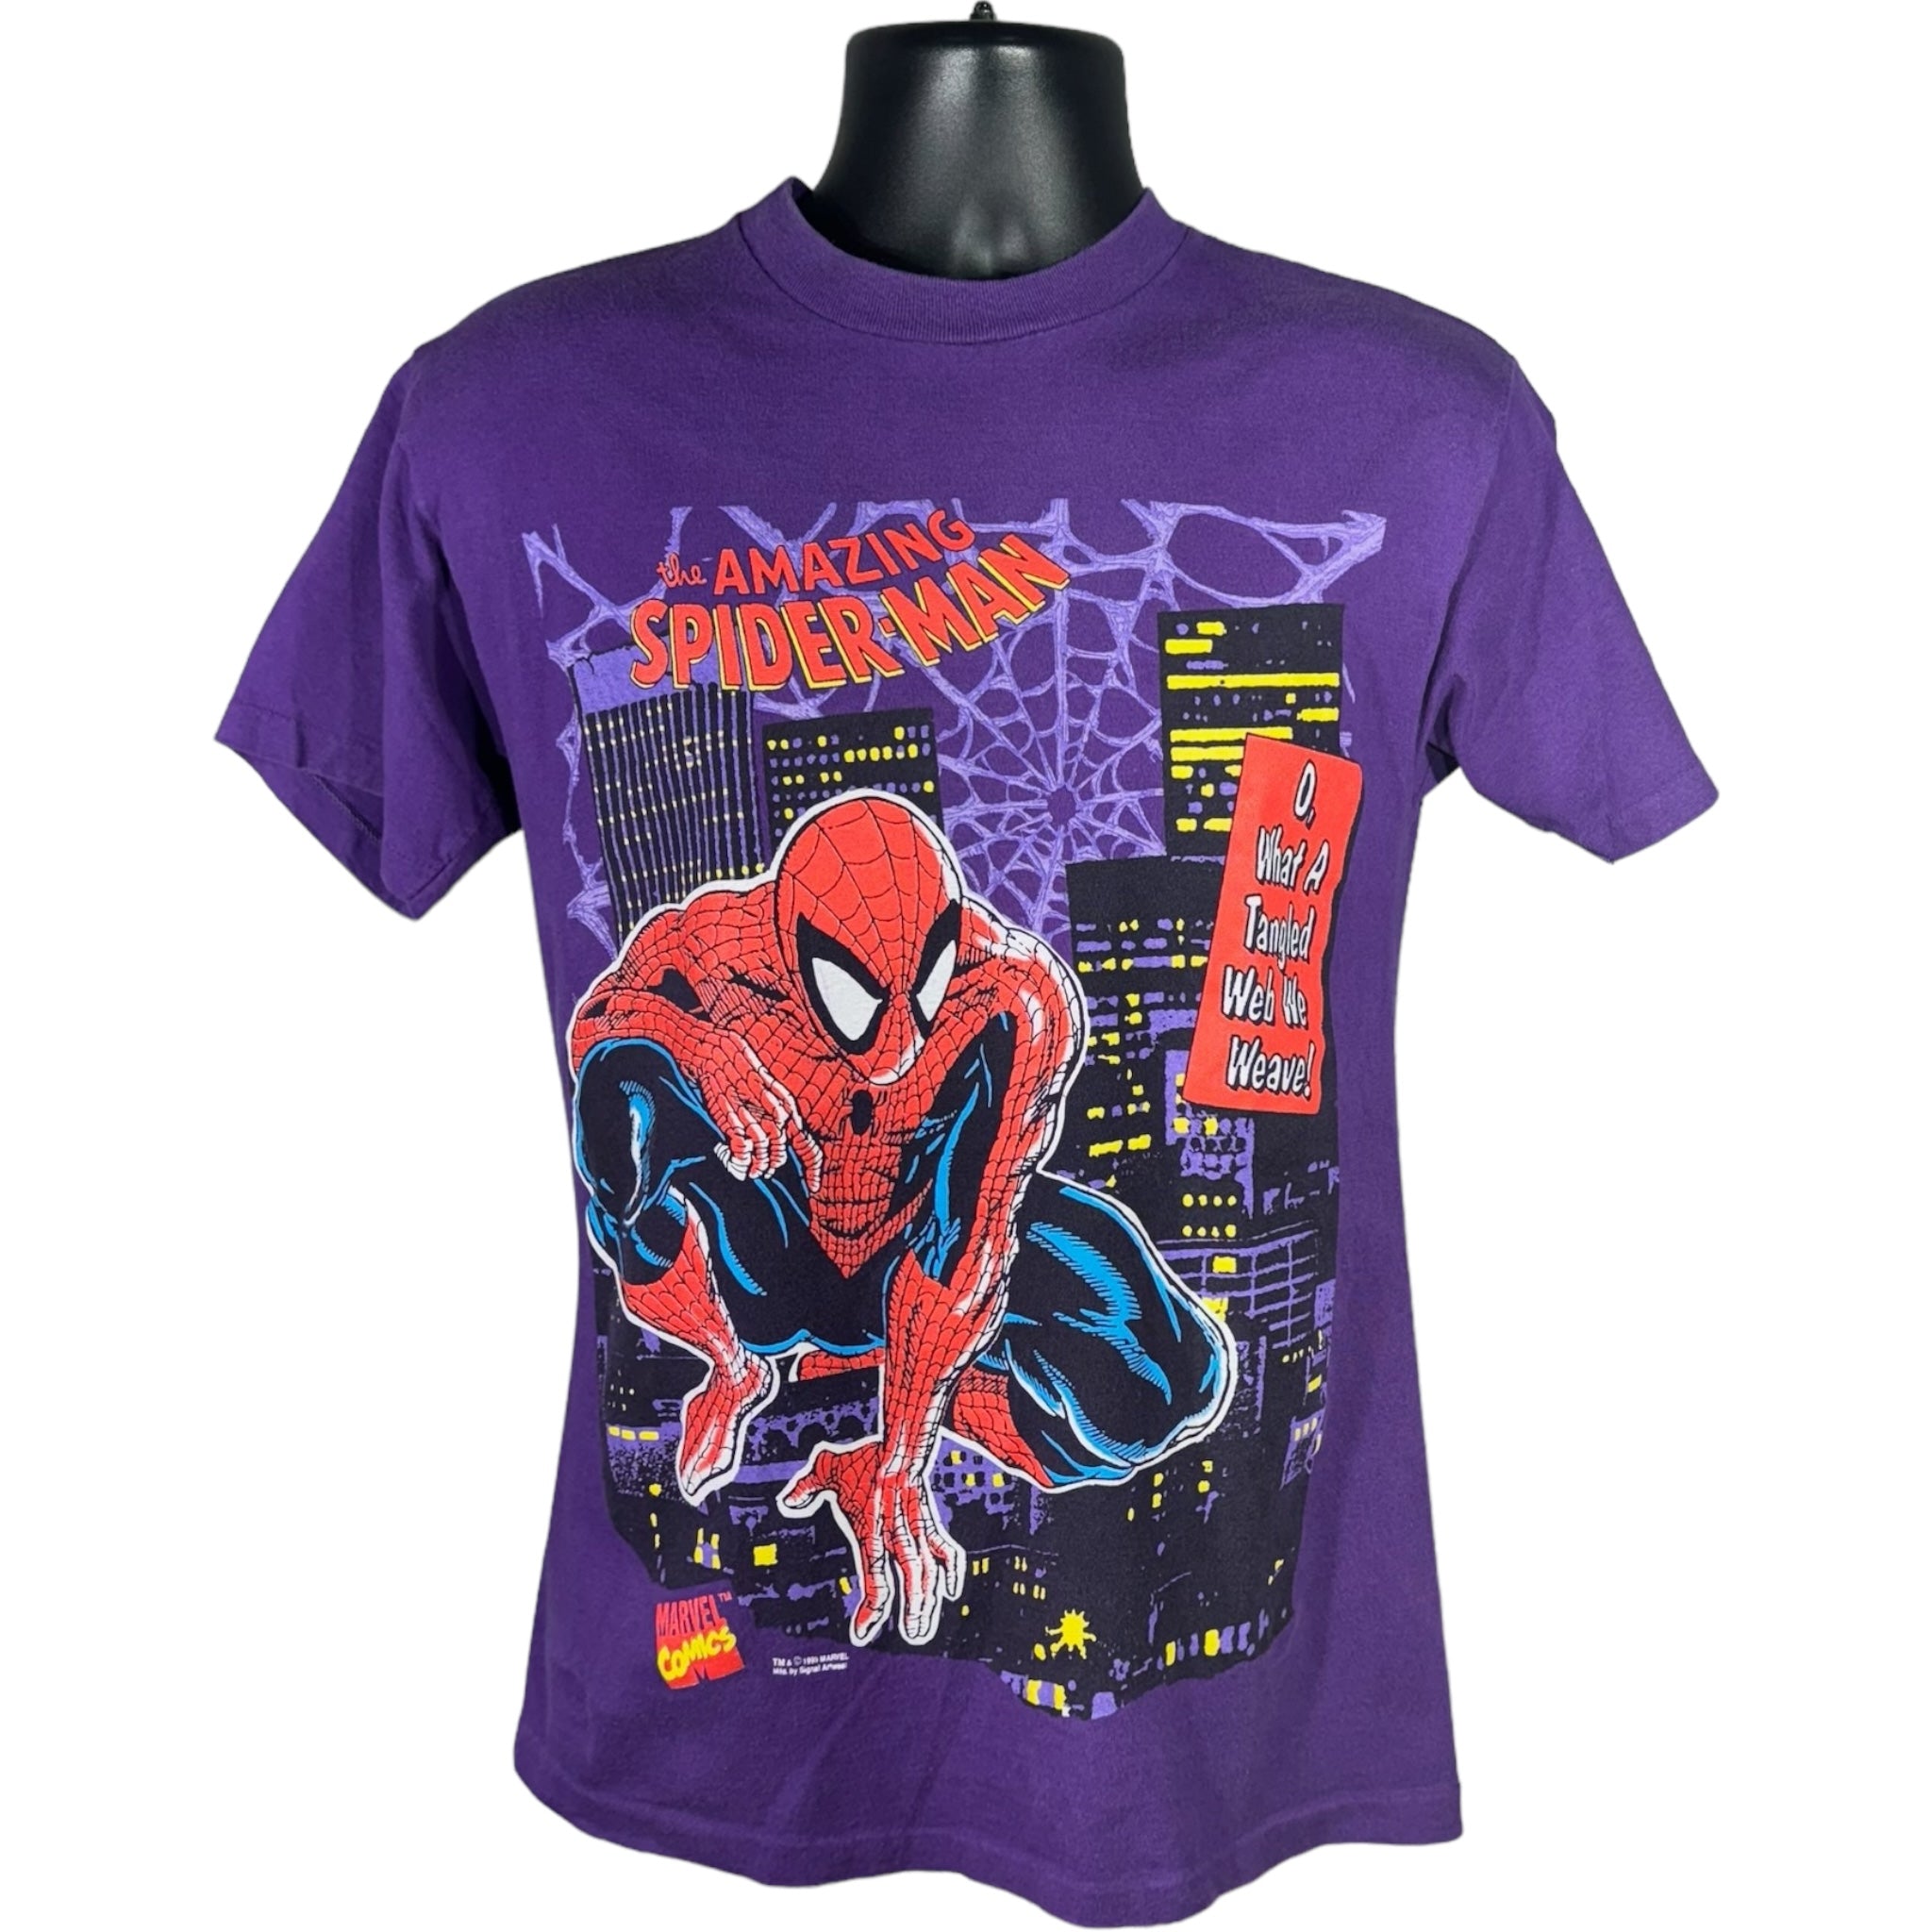 Vintage The Amazing Spiderman "What A Tangled Web We Weave" Tee 1993